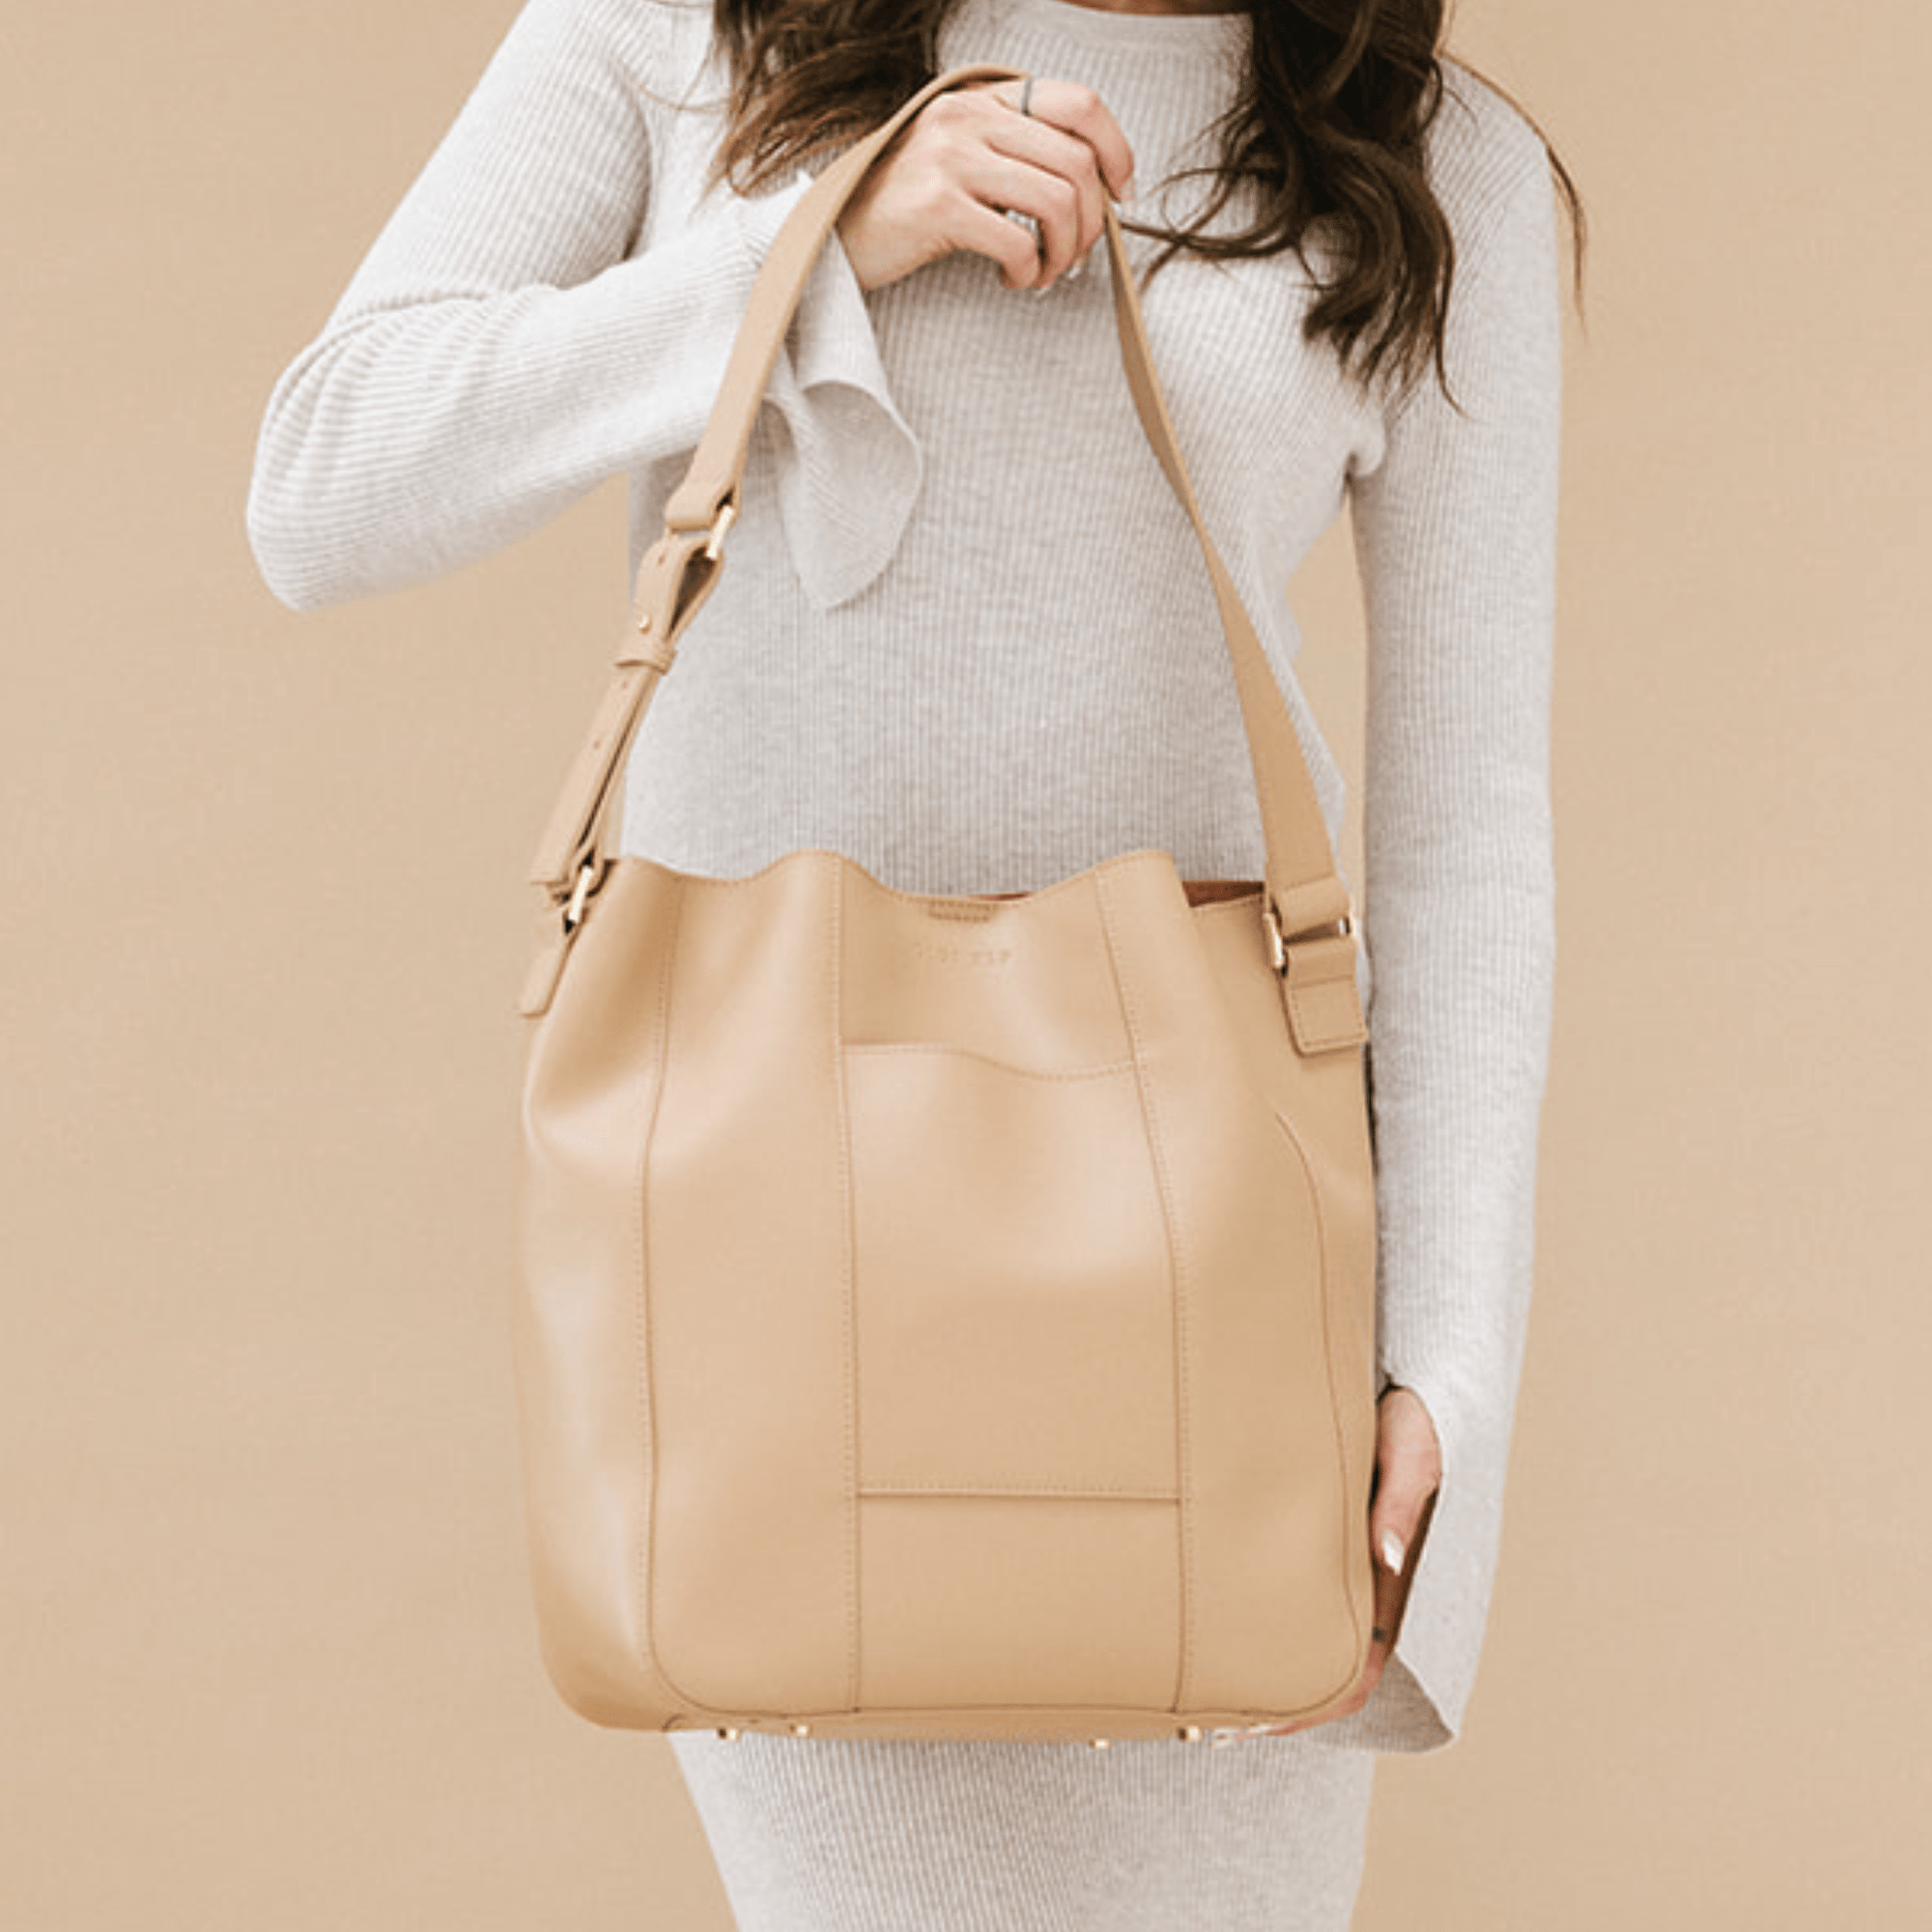 Gigi Pip luxury bags for women - Dia Everyday Tote - 100% genuine leather everyday tote equipped with interior laptop sleeve, zipper pocket + gigi pip embossed on the front panel [tan]